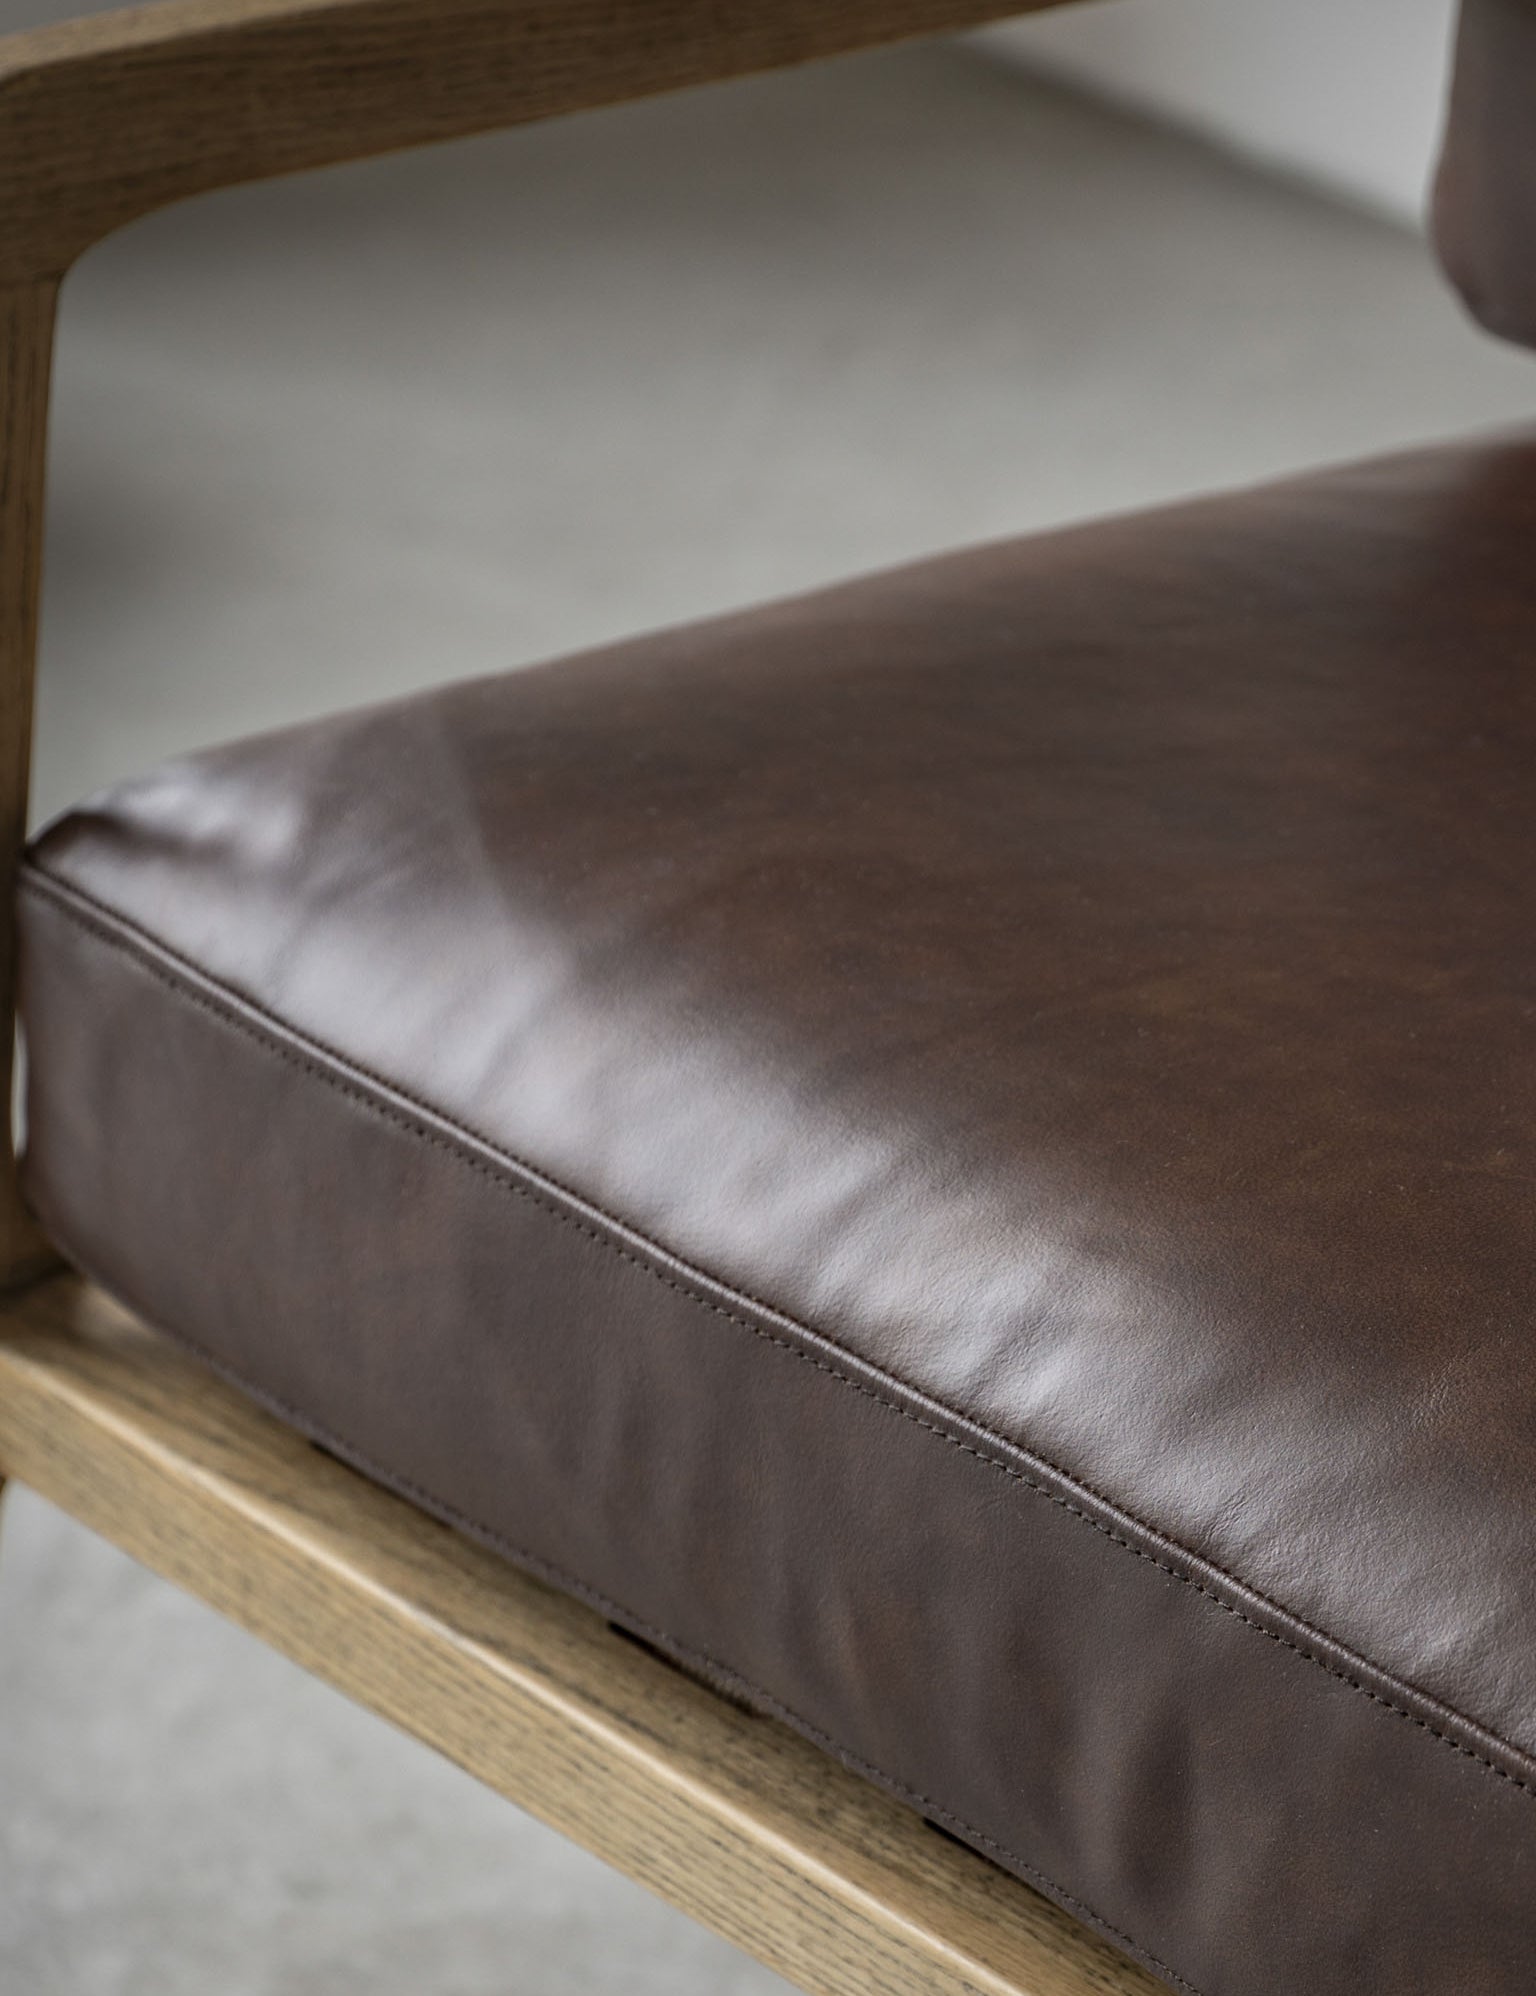 Brown armchair in Antique Brown Leather with wooden arms